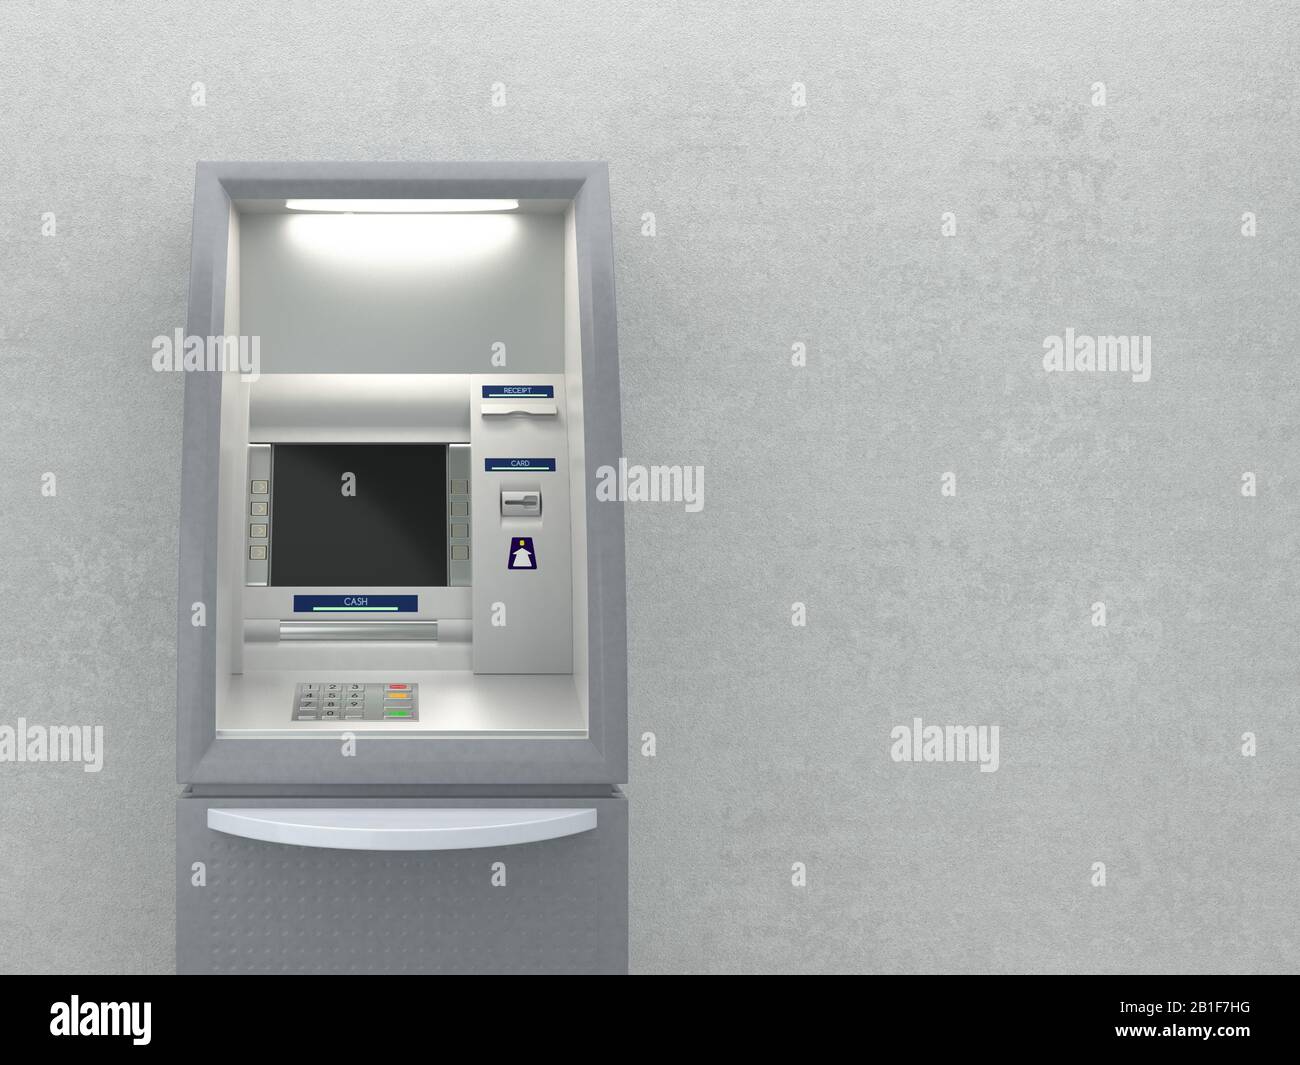 Atm machine on wall Stock Photo